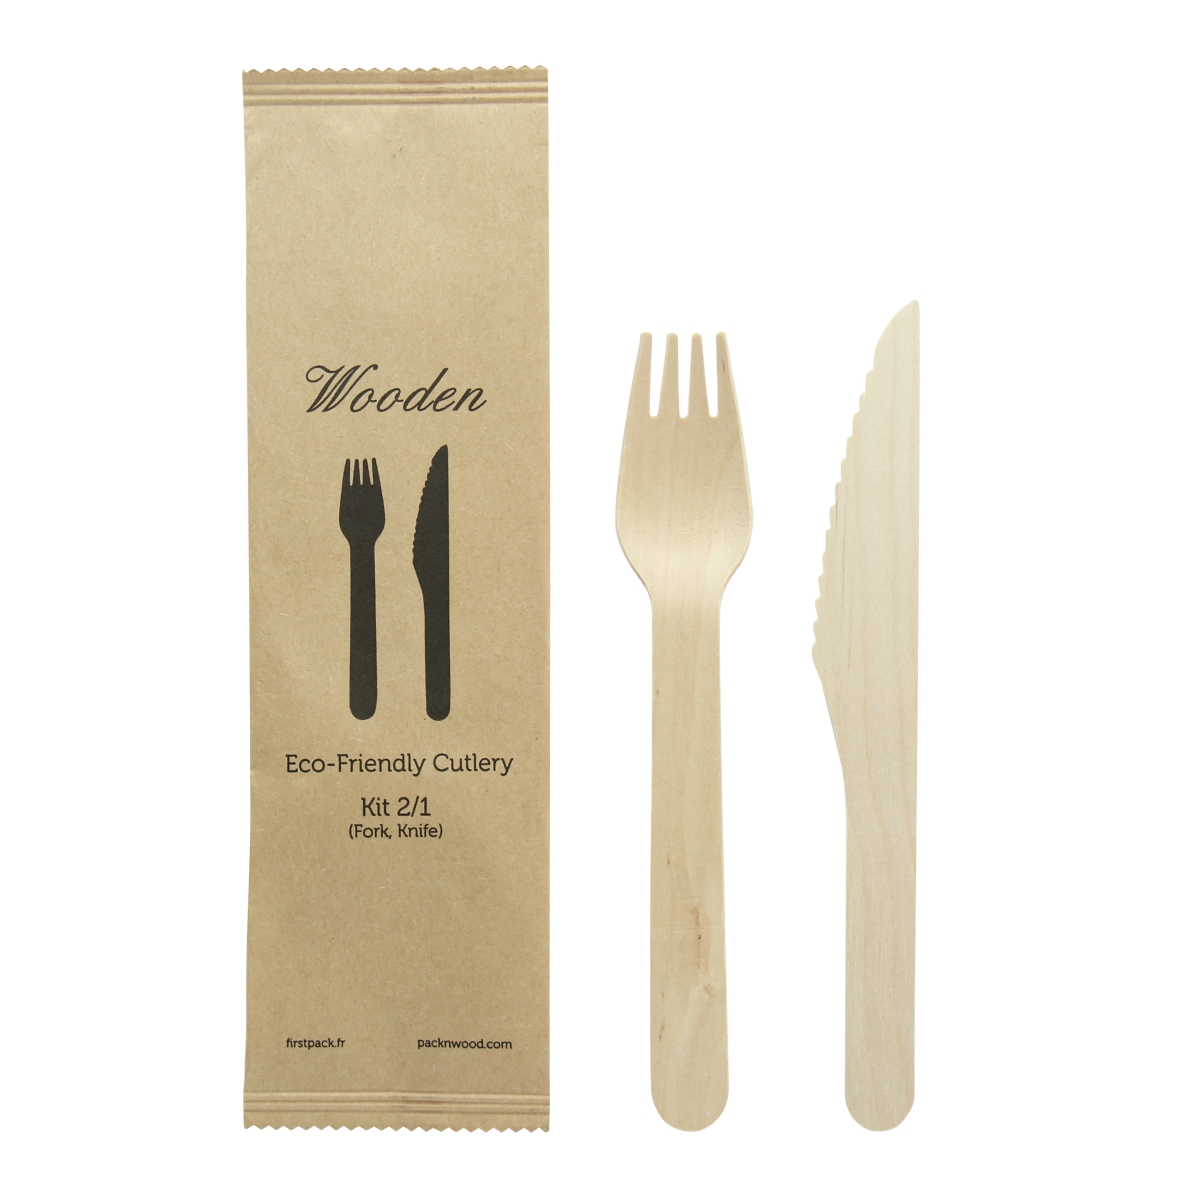 Picture of Packnwood 210COUVB2K 6.2 in. Wooden Cutlery 2-1 Kit